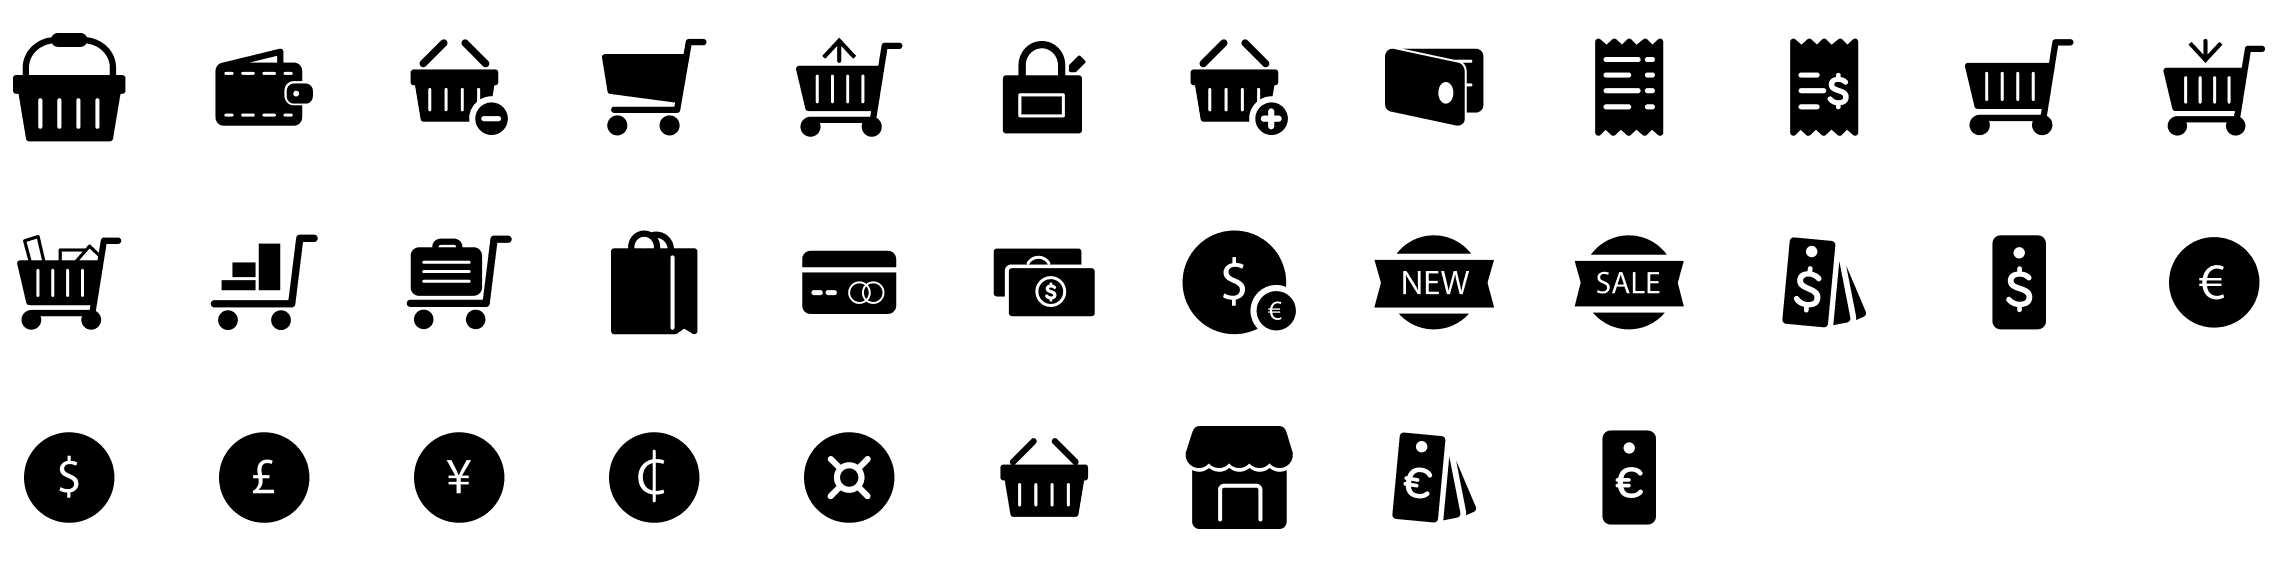 shopping-glyph-icons-preview